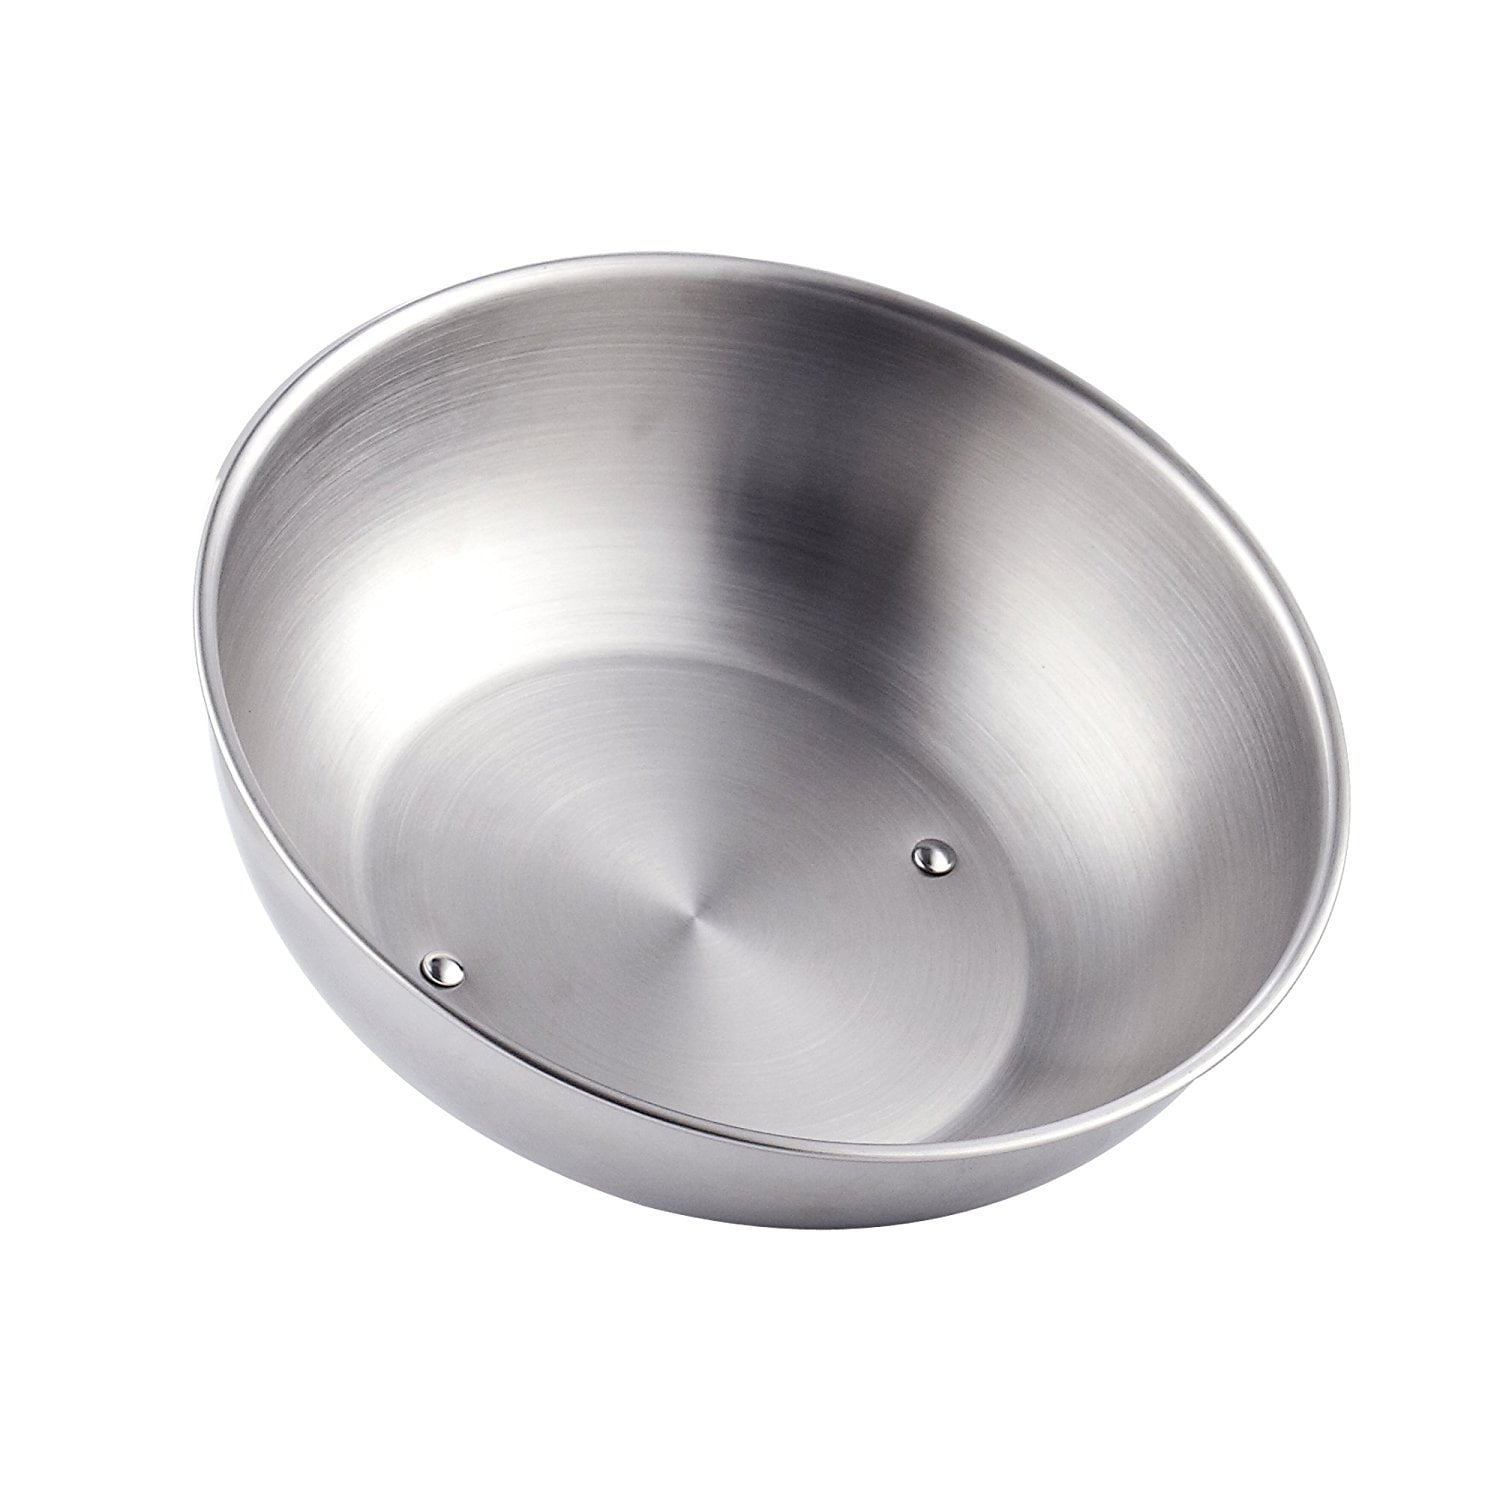 SS COOKING DOME D.28 cm W/ STEAM BUTTOM~ ENO 